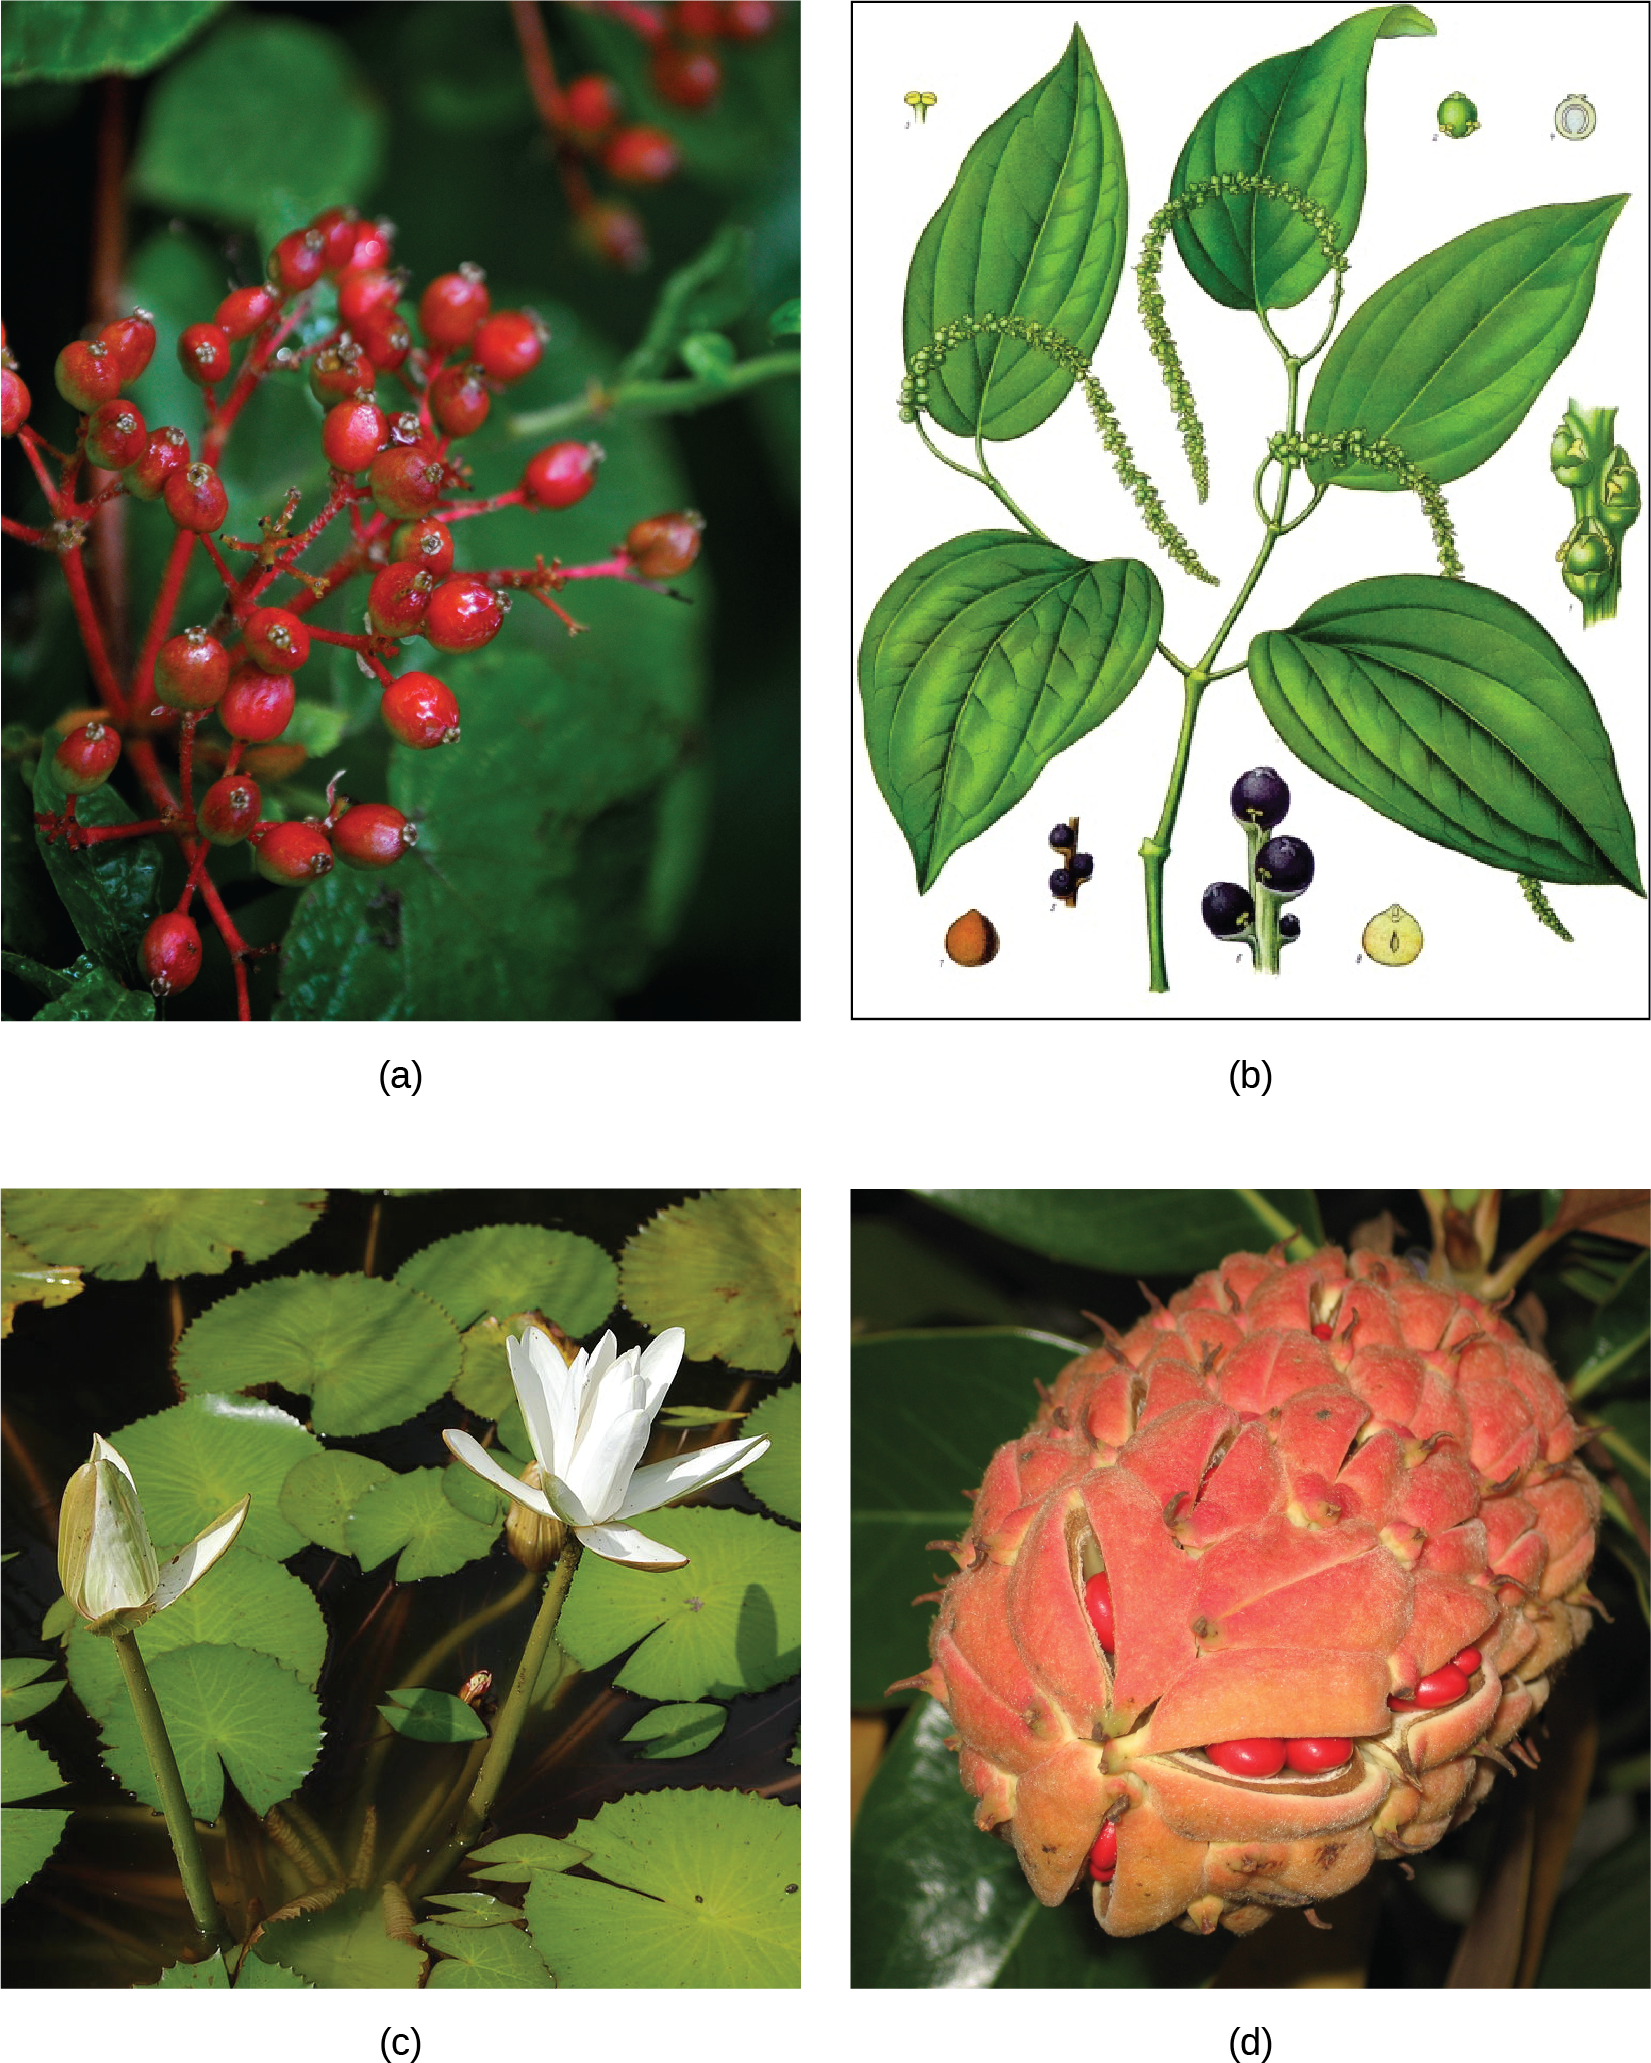 Photo A depicts a common spicebush plant with bright red berries growing at the tips of red stems. Illustration B shows a pepper plant with teardrop-shaped leaves and tiny flowers clustered on a long stem. Photo C shows lotus plants with broad, circular leaves and white flowers growing in water. Photo D shows red magnolia seeds clustered in an egg-shaped pink sac scattered with small, brown spikes.